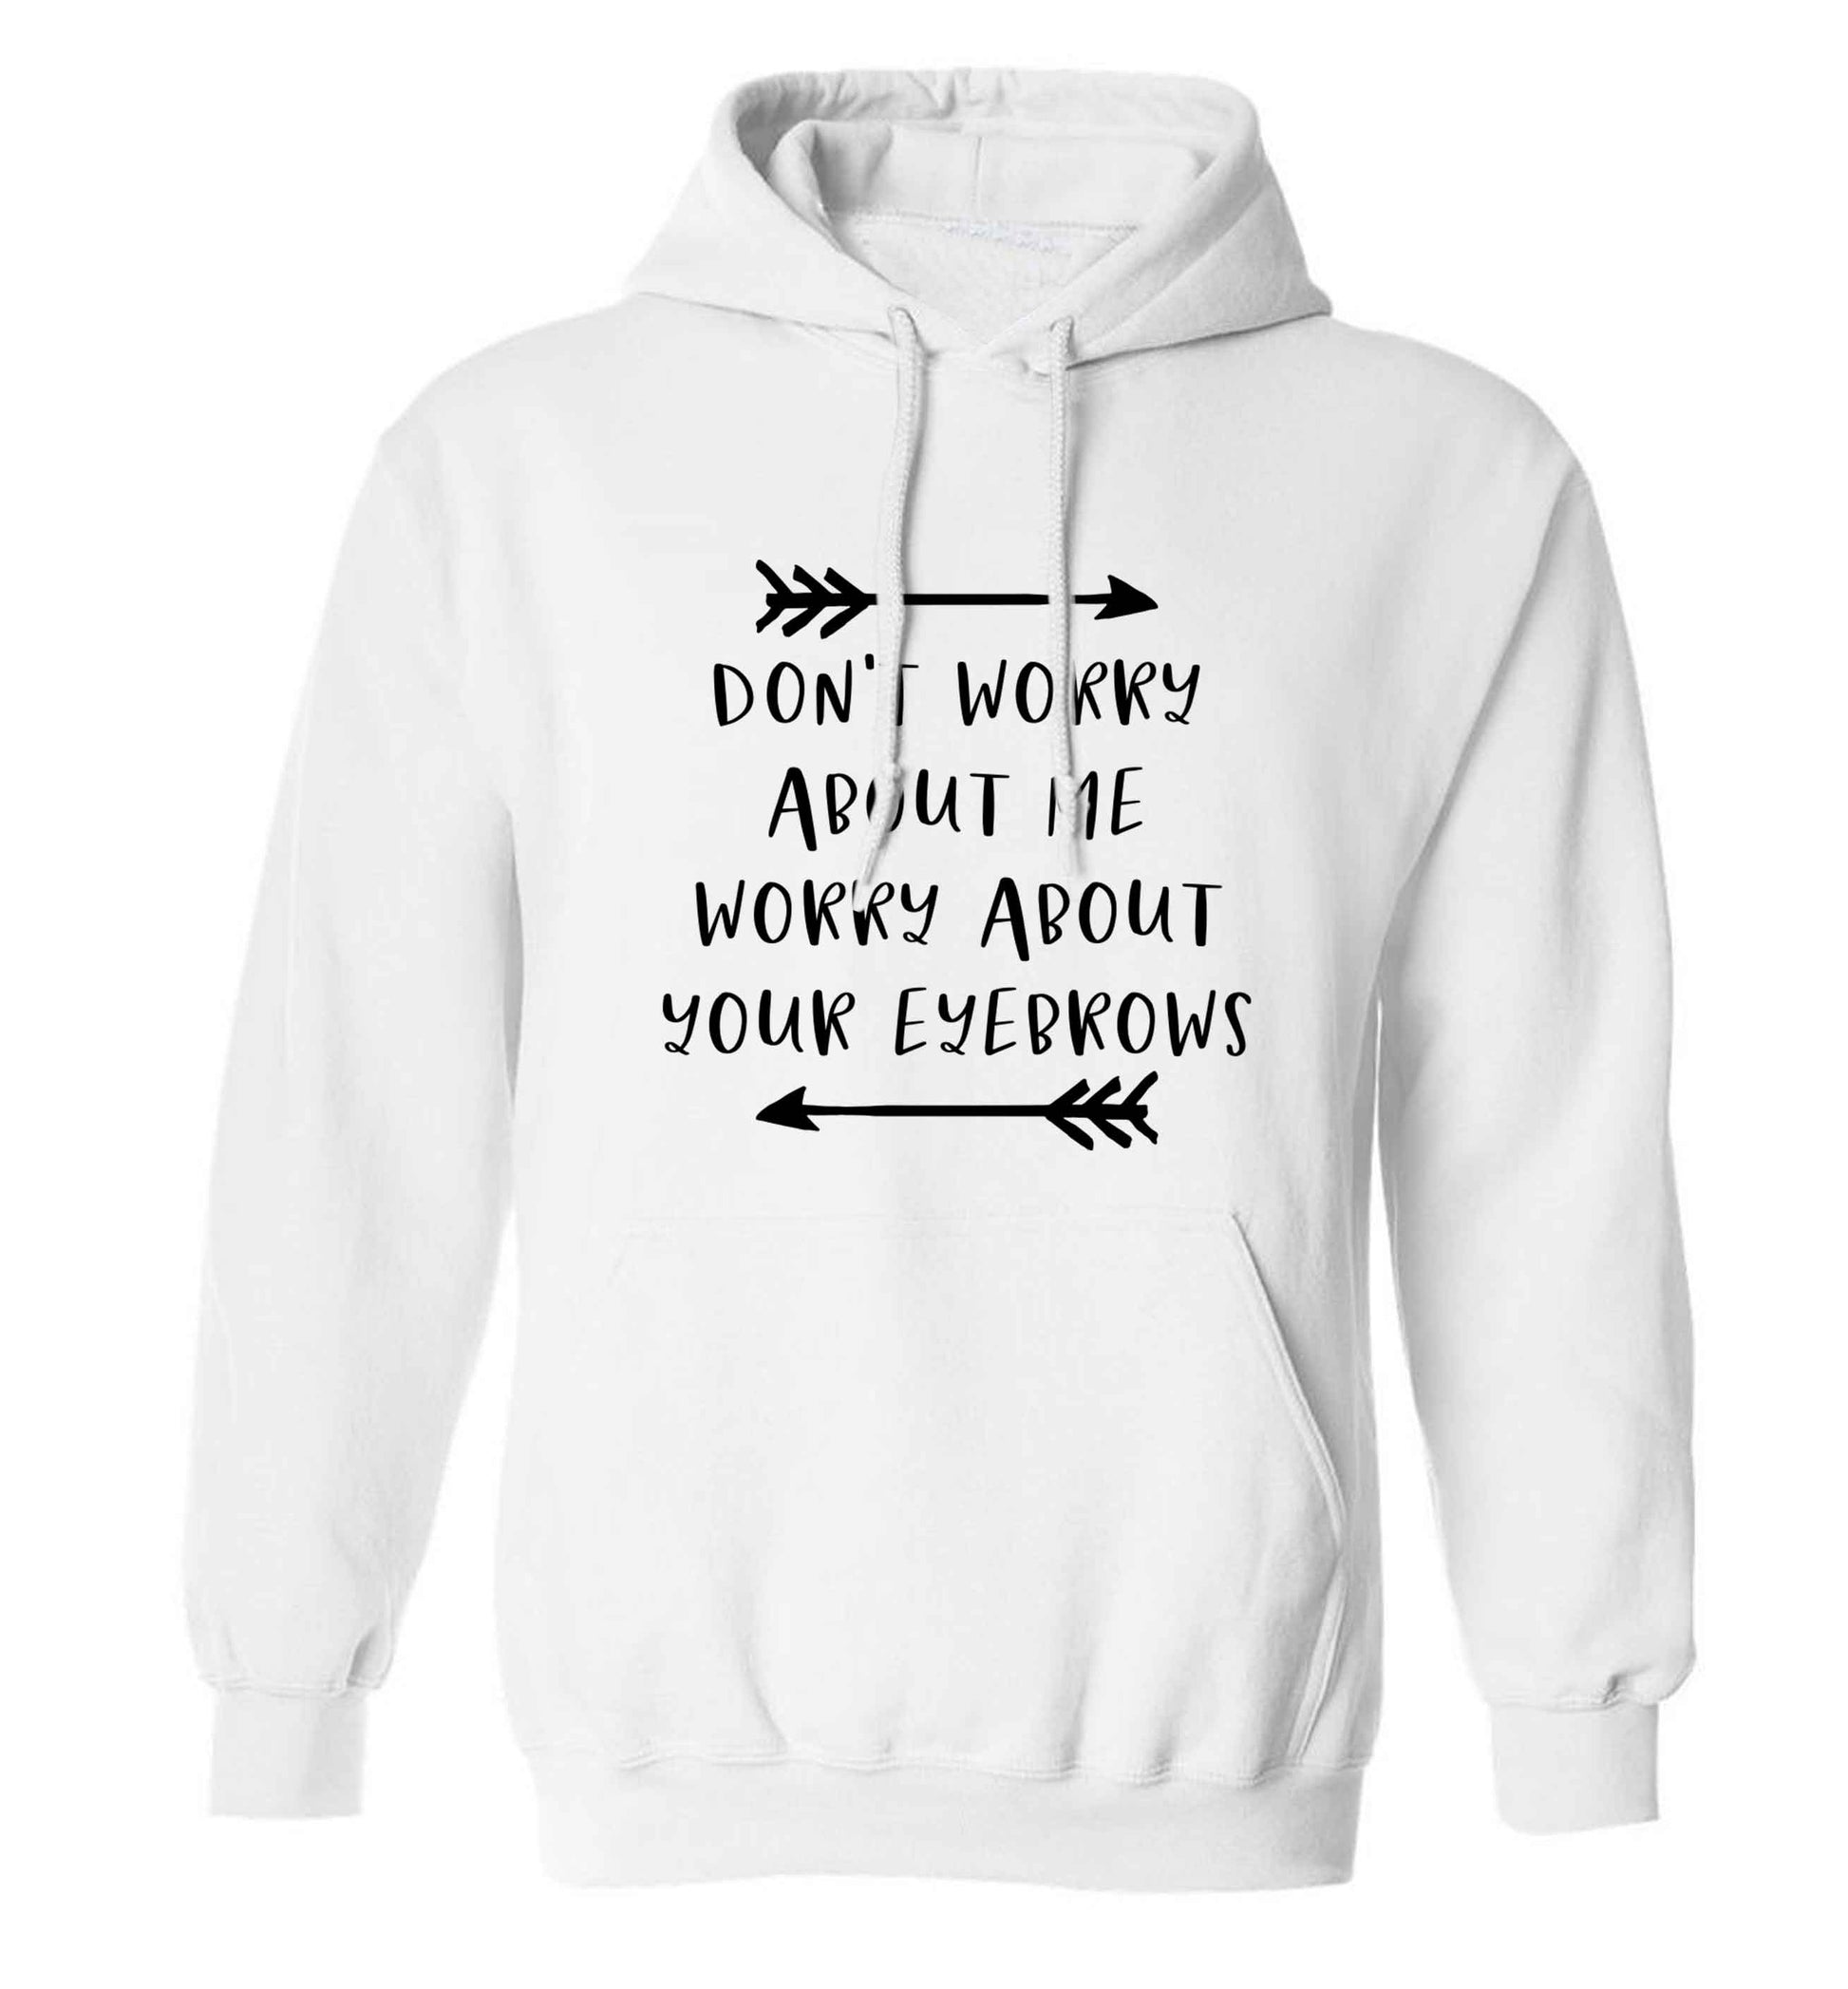 Don't worry about me worry about your eyebrows adults unisex white hoodie 2XL